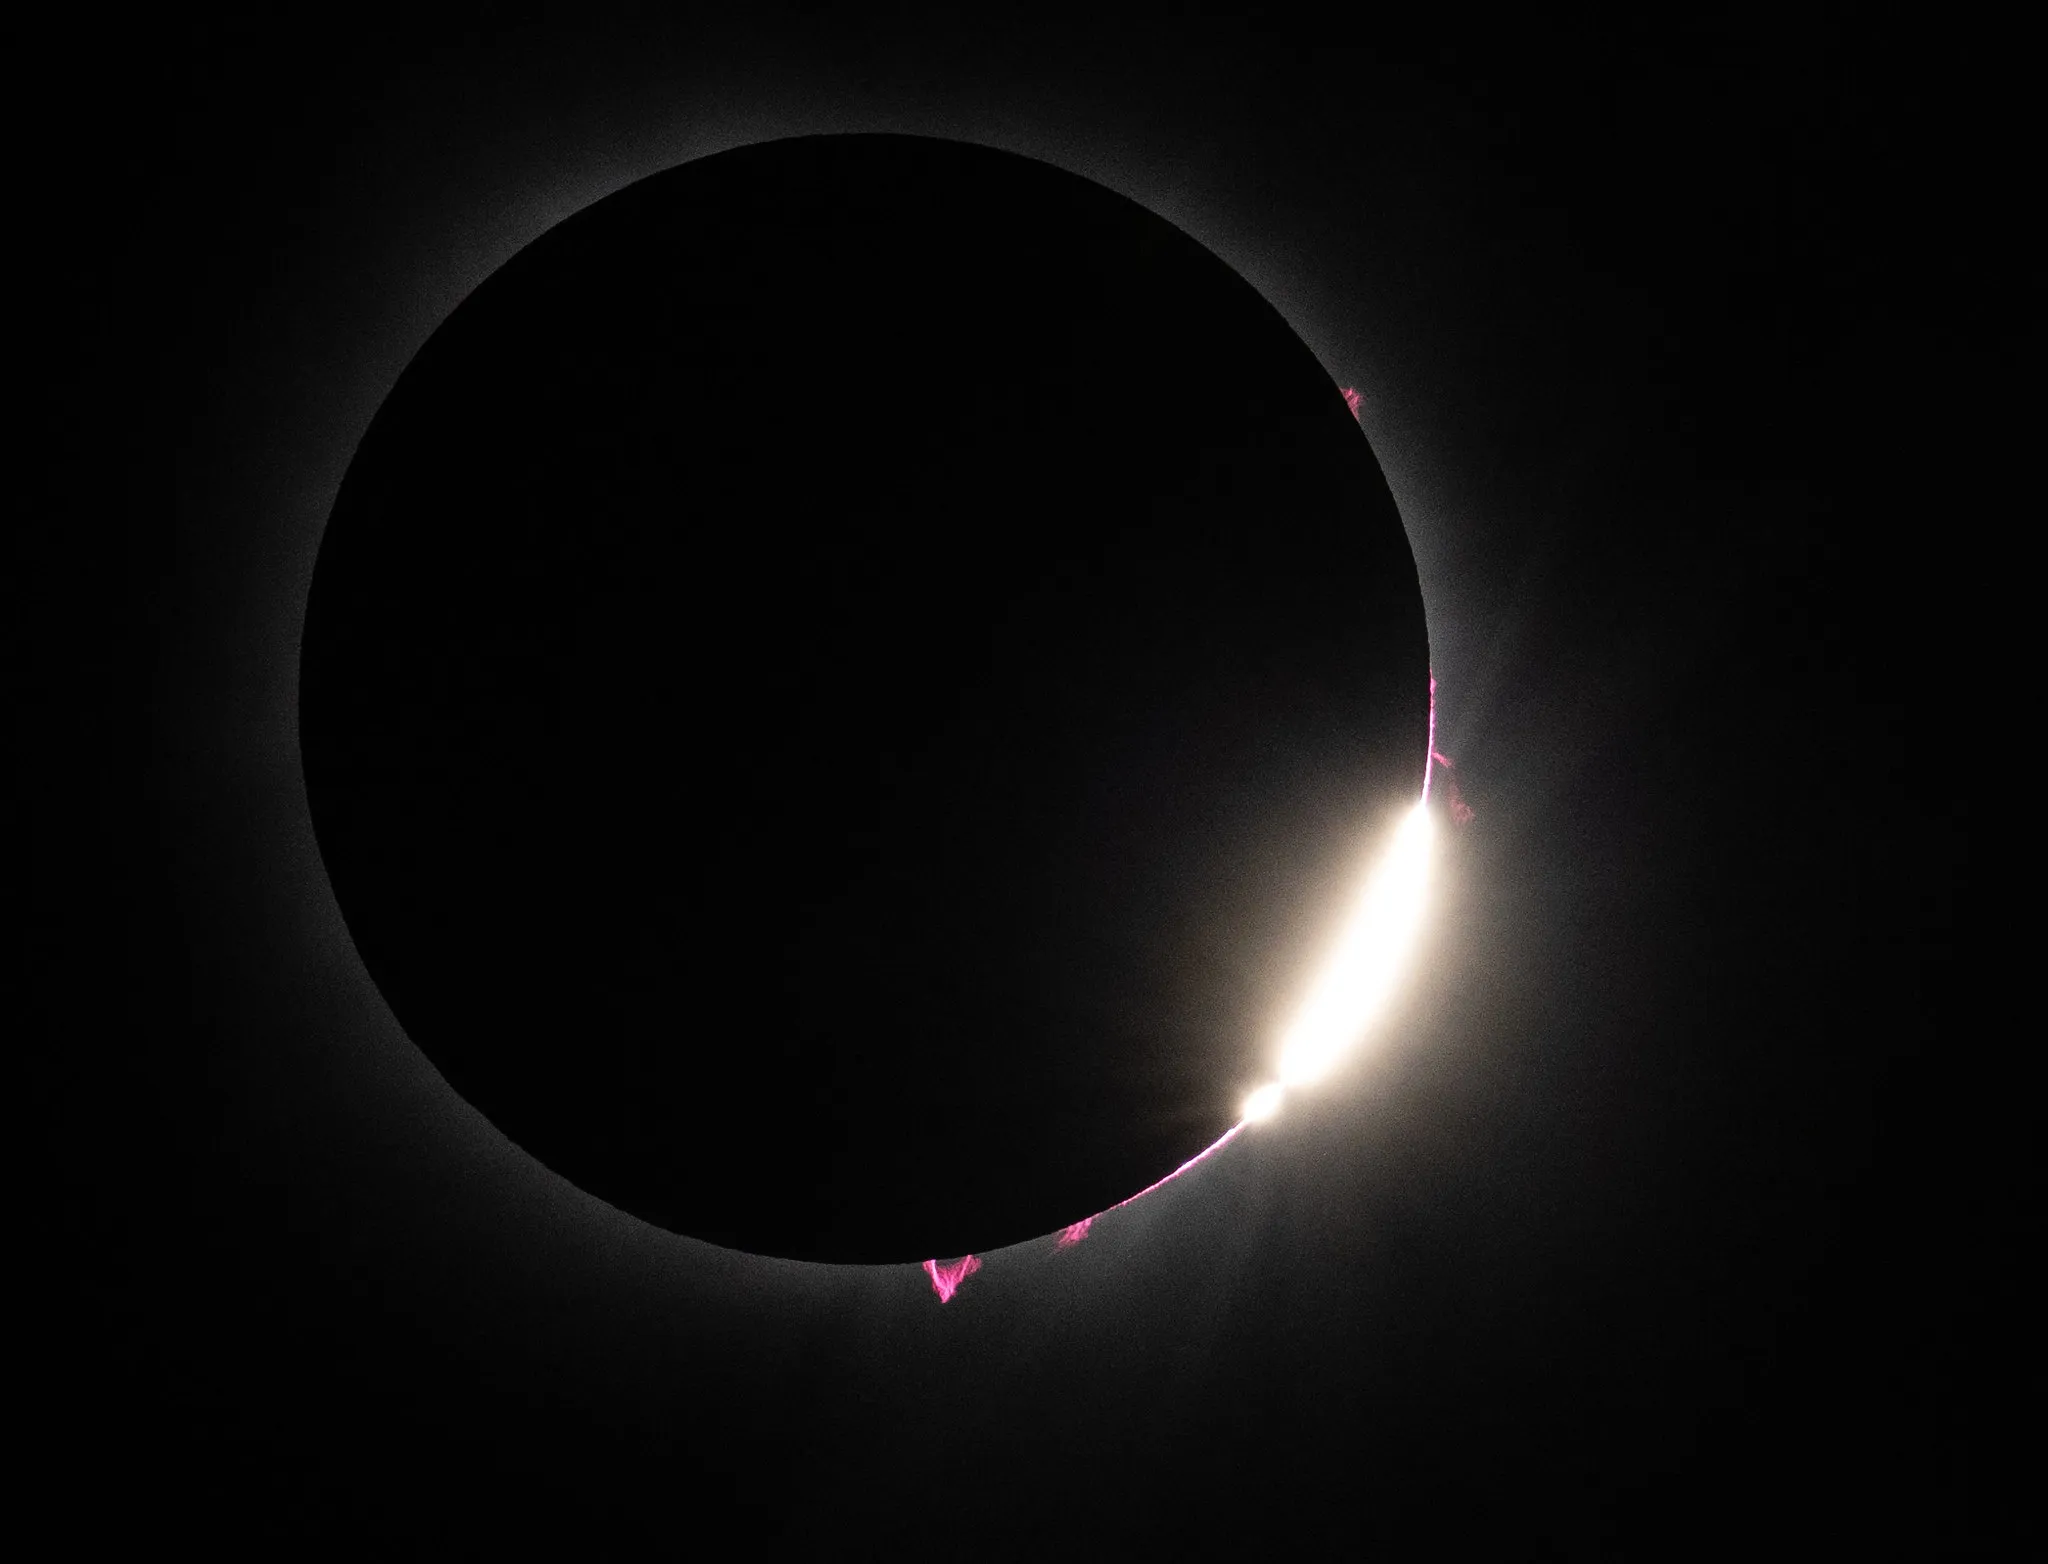 Alaskans will have a chance to see a total solar eclipse... in 9 years